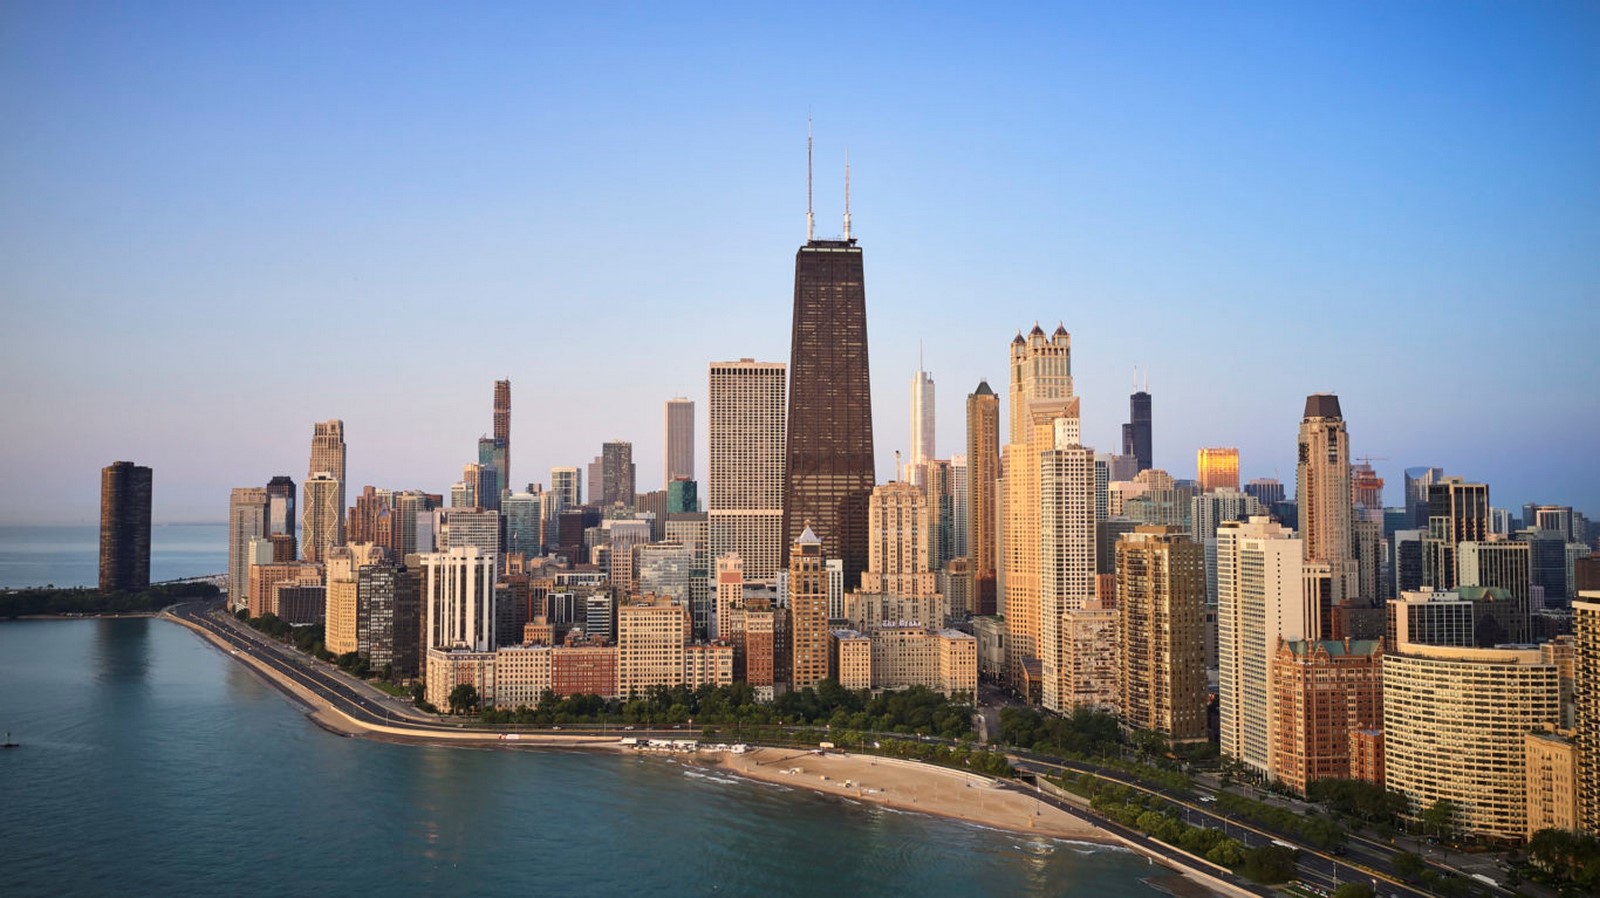 Buildings In Chicago: 15 Architectural Marvels Every Architect Must See - Sheet1